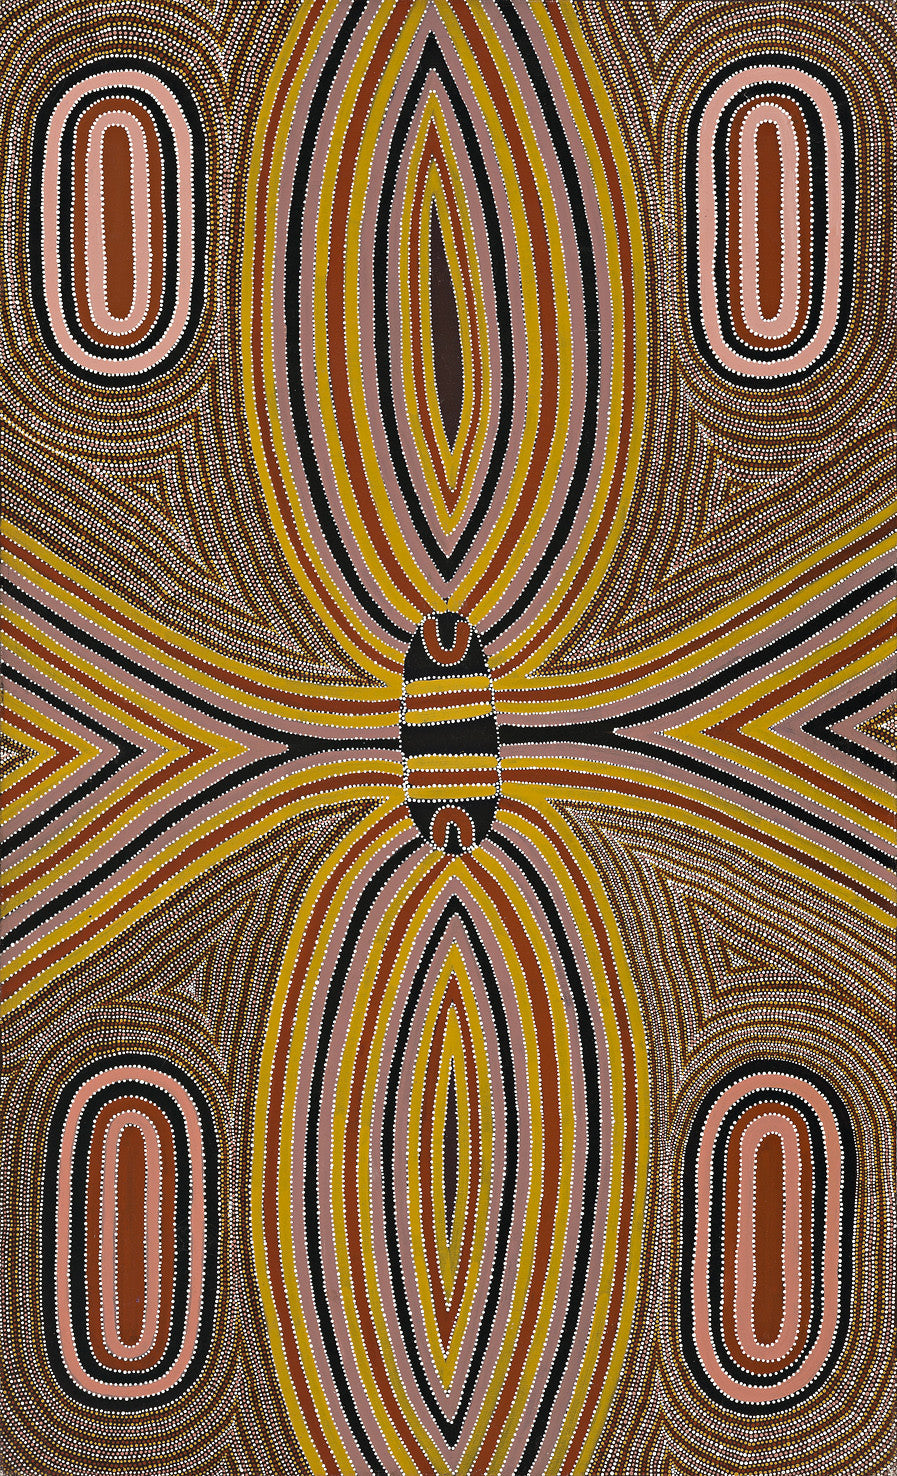 Louie Pwerle, Painting 97F013, 1997, 91x151cm - Delmore Gallery